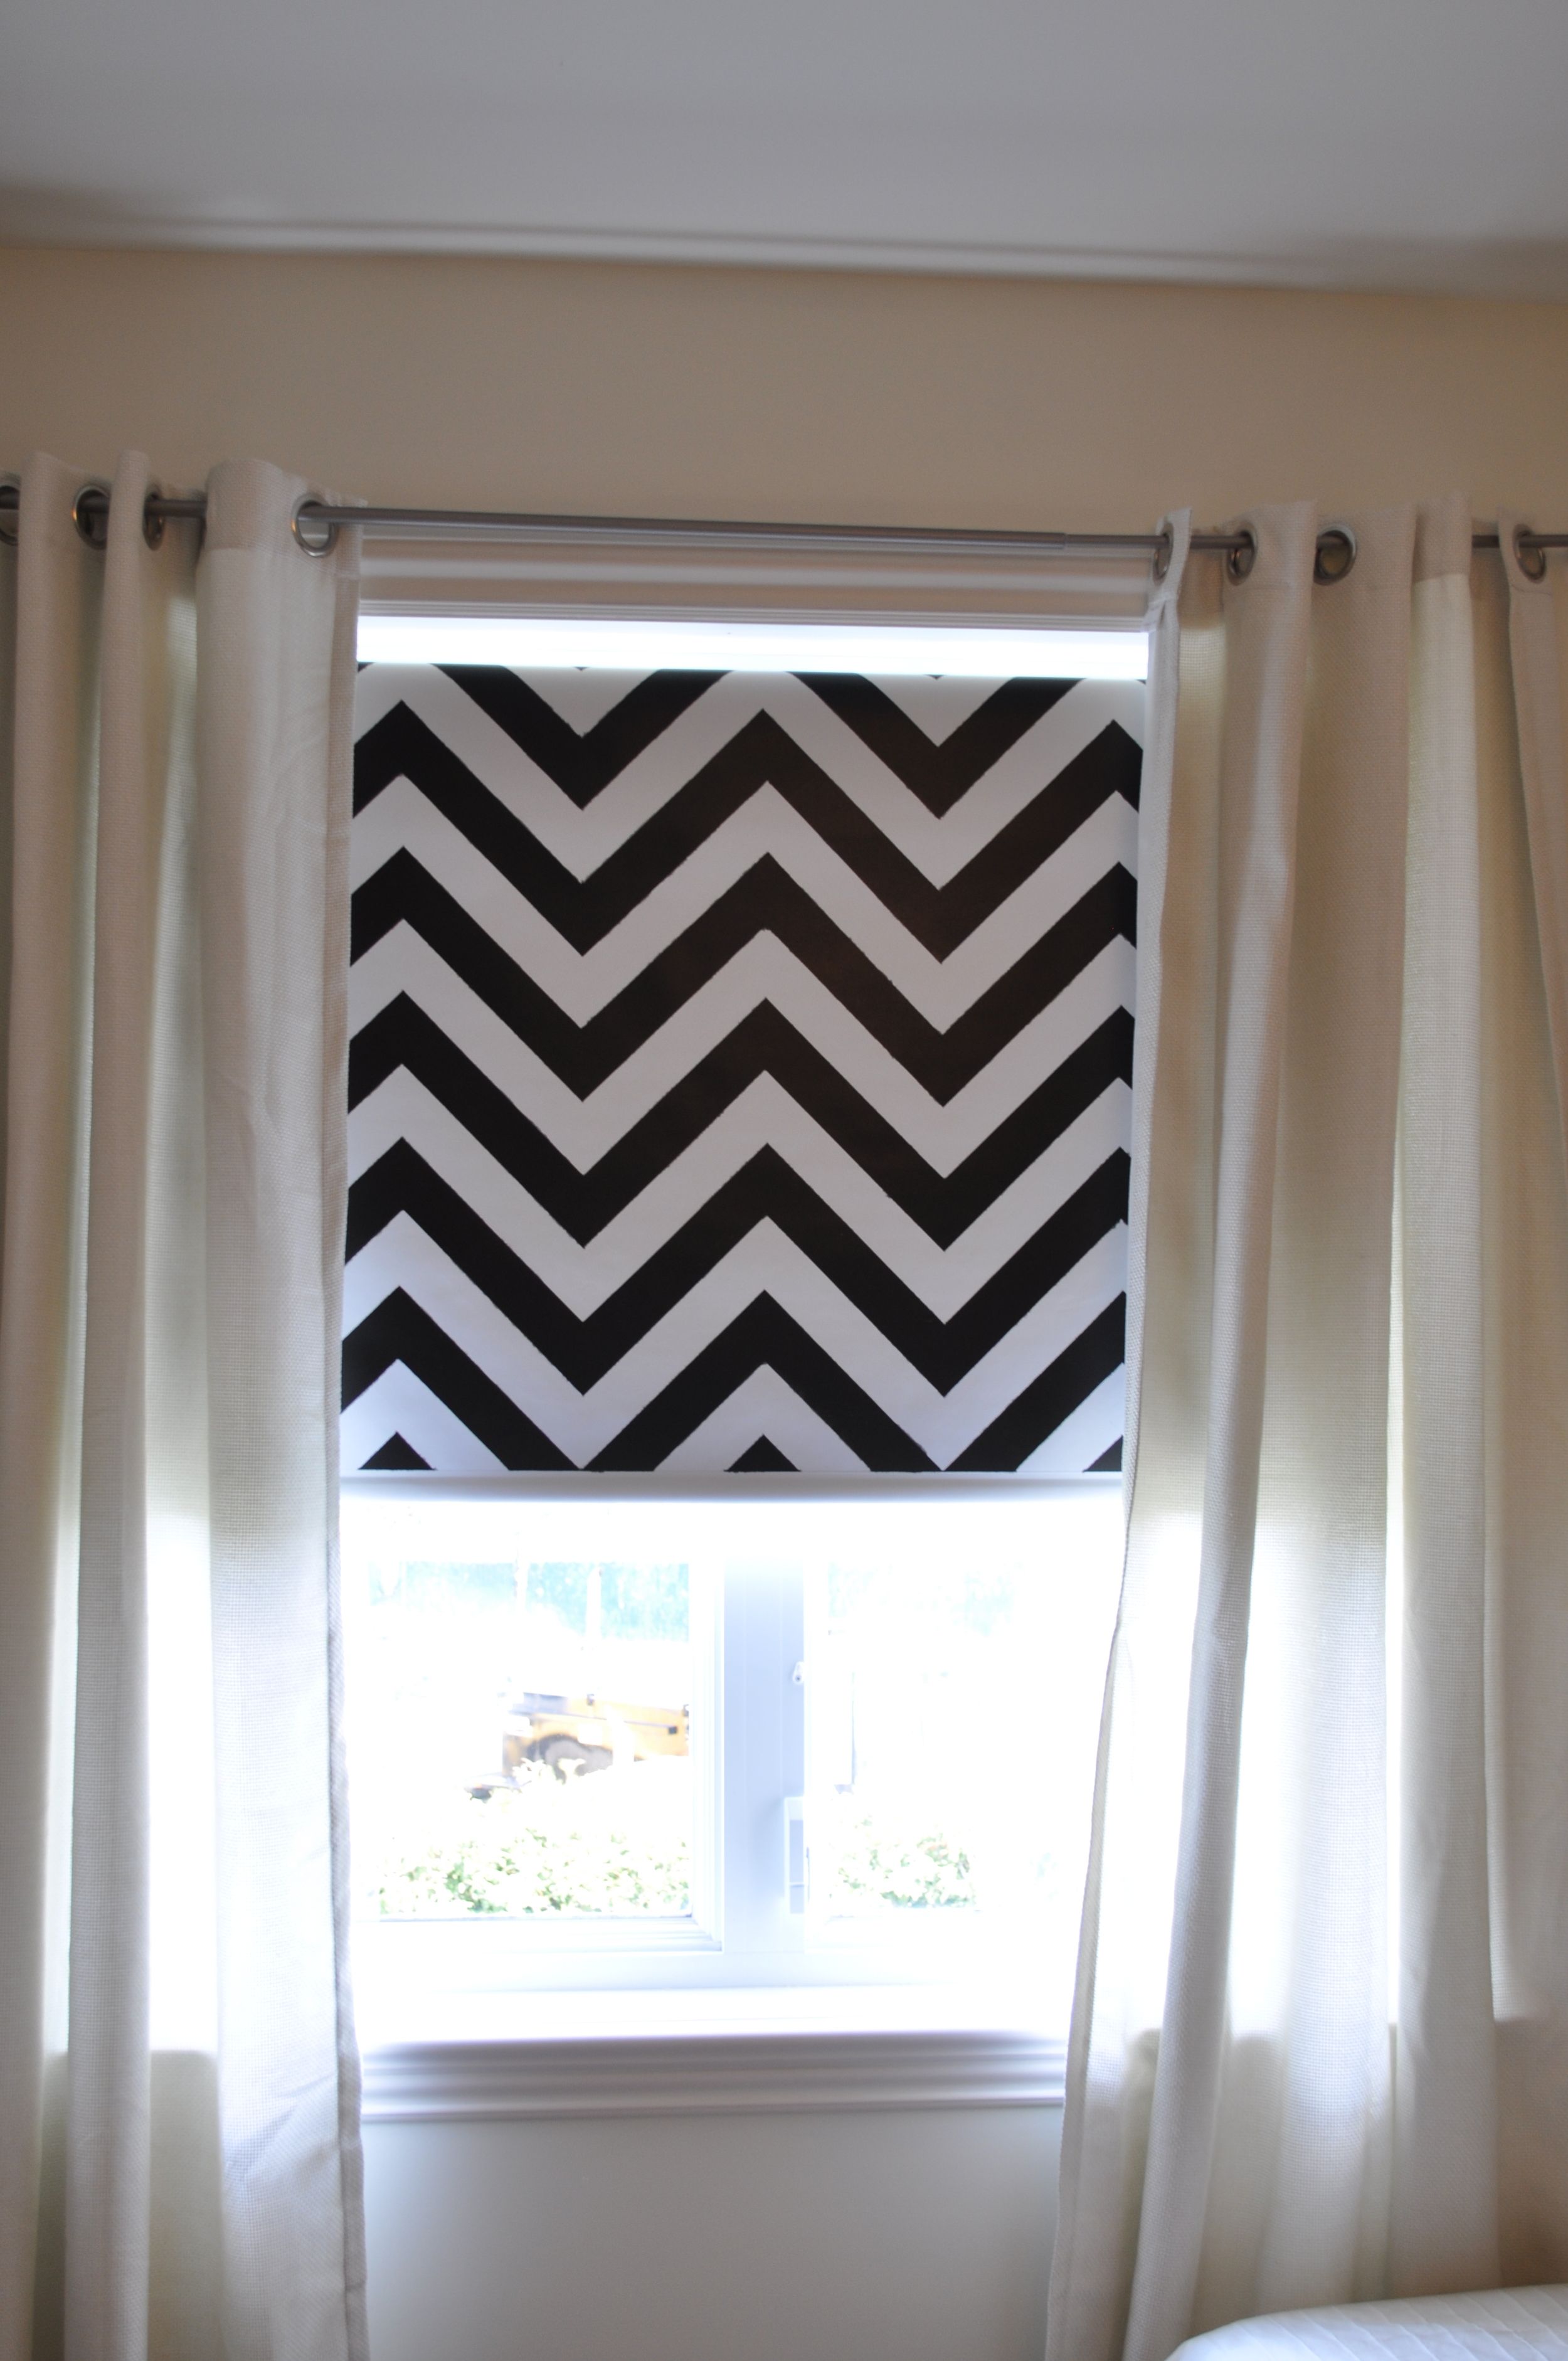 Diy Chevron Roller Blind Vinyls Grey And Chevron Throughout Black And White Roman Blinds (View 6 of 15)